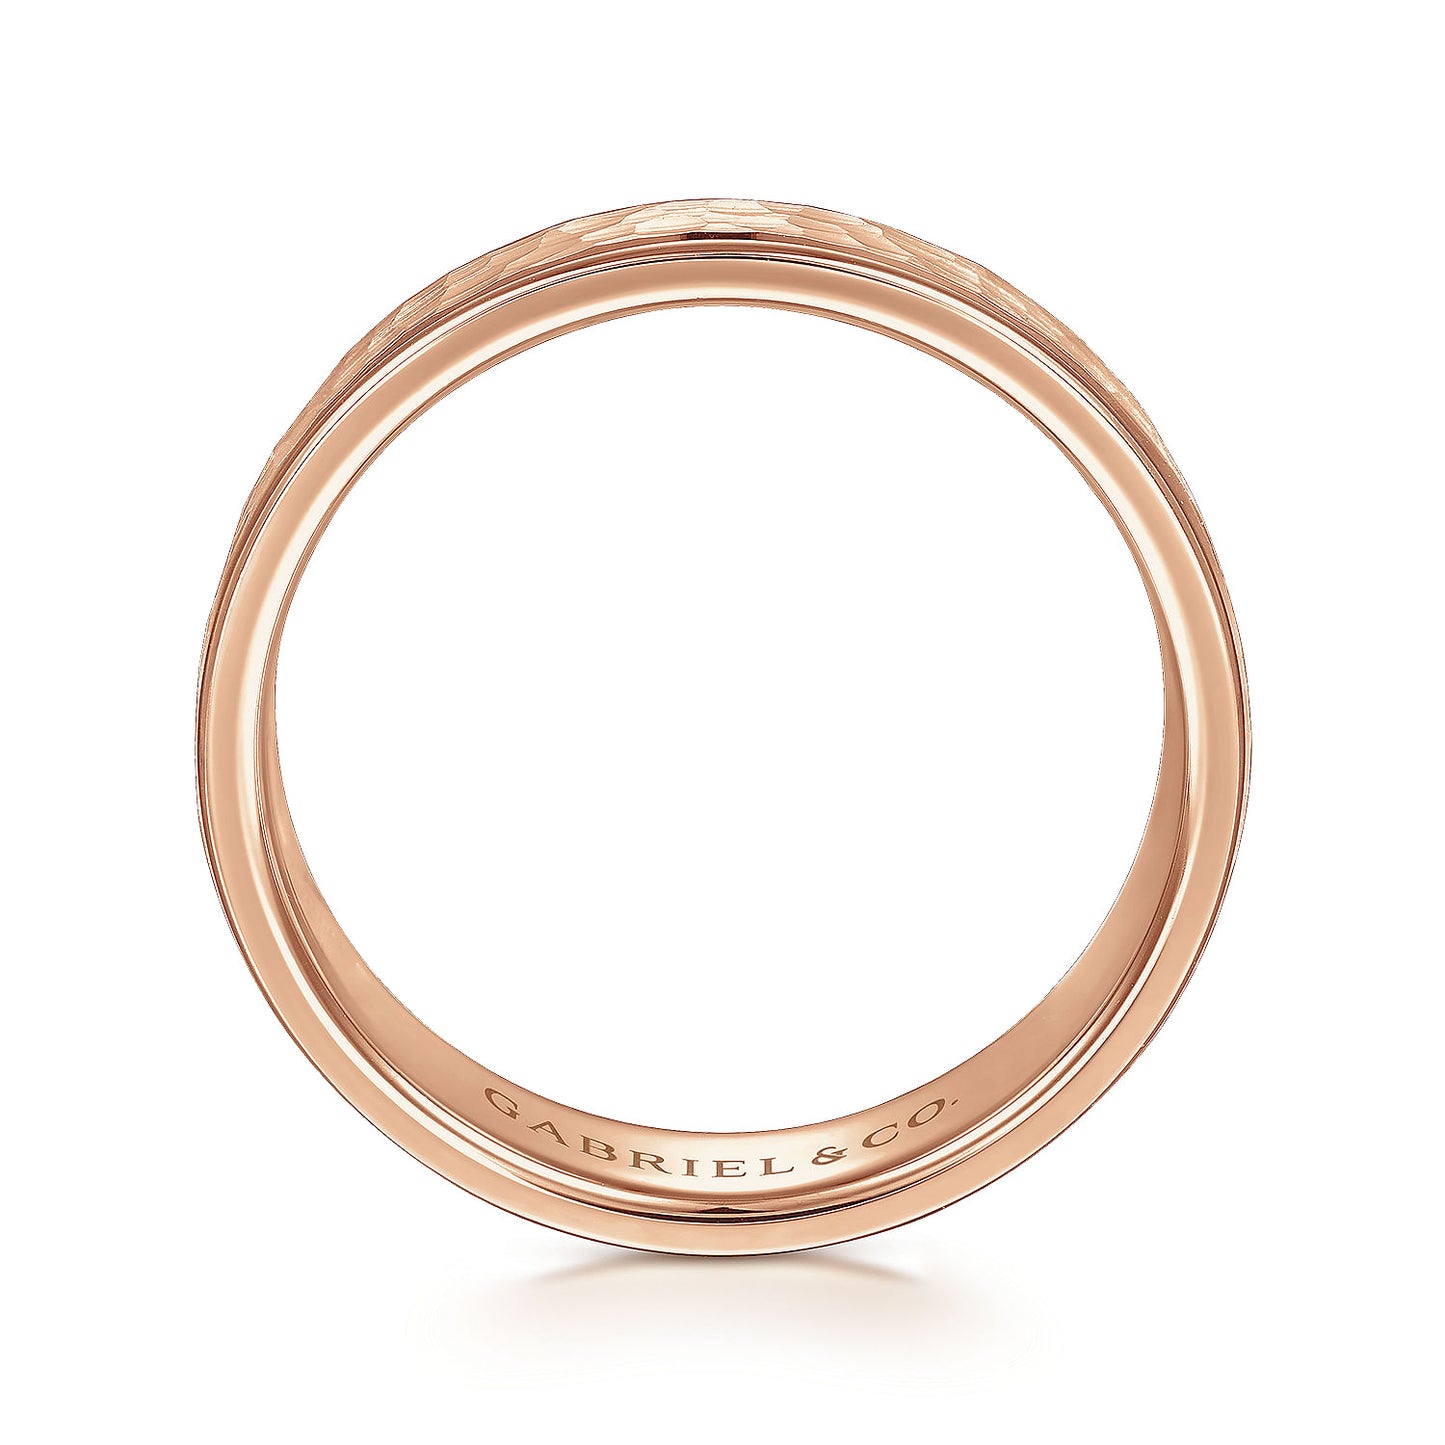 Gabriel & Co Rose Gold Wedding Band With A Hammered Finished Center And A Rounded Polished Edge - Gold Wedding Bands - Men's